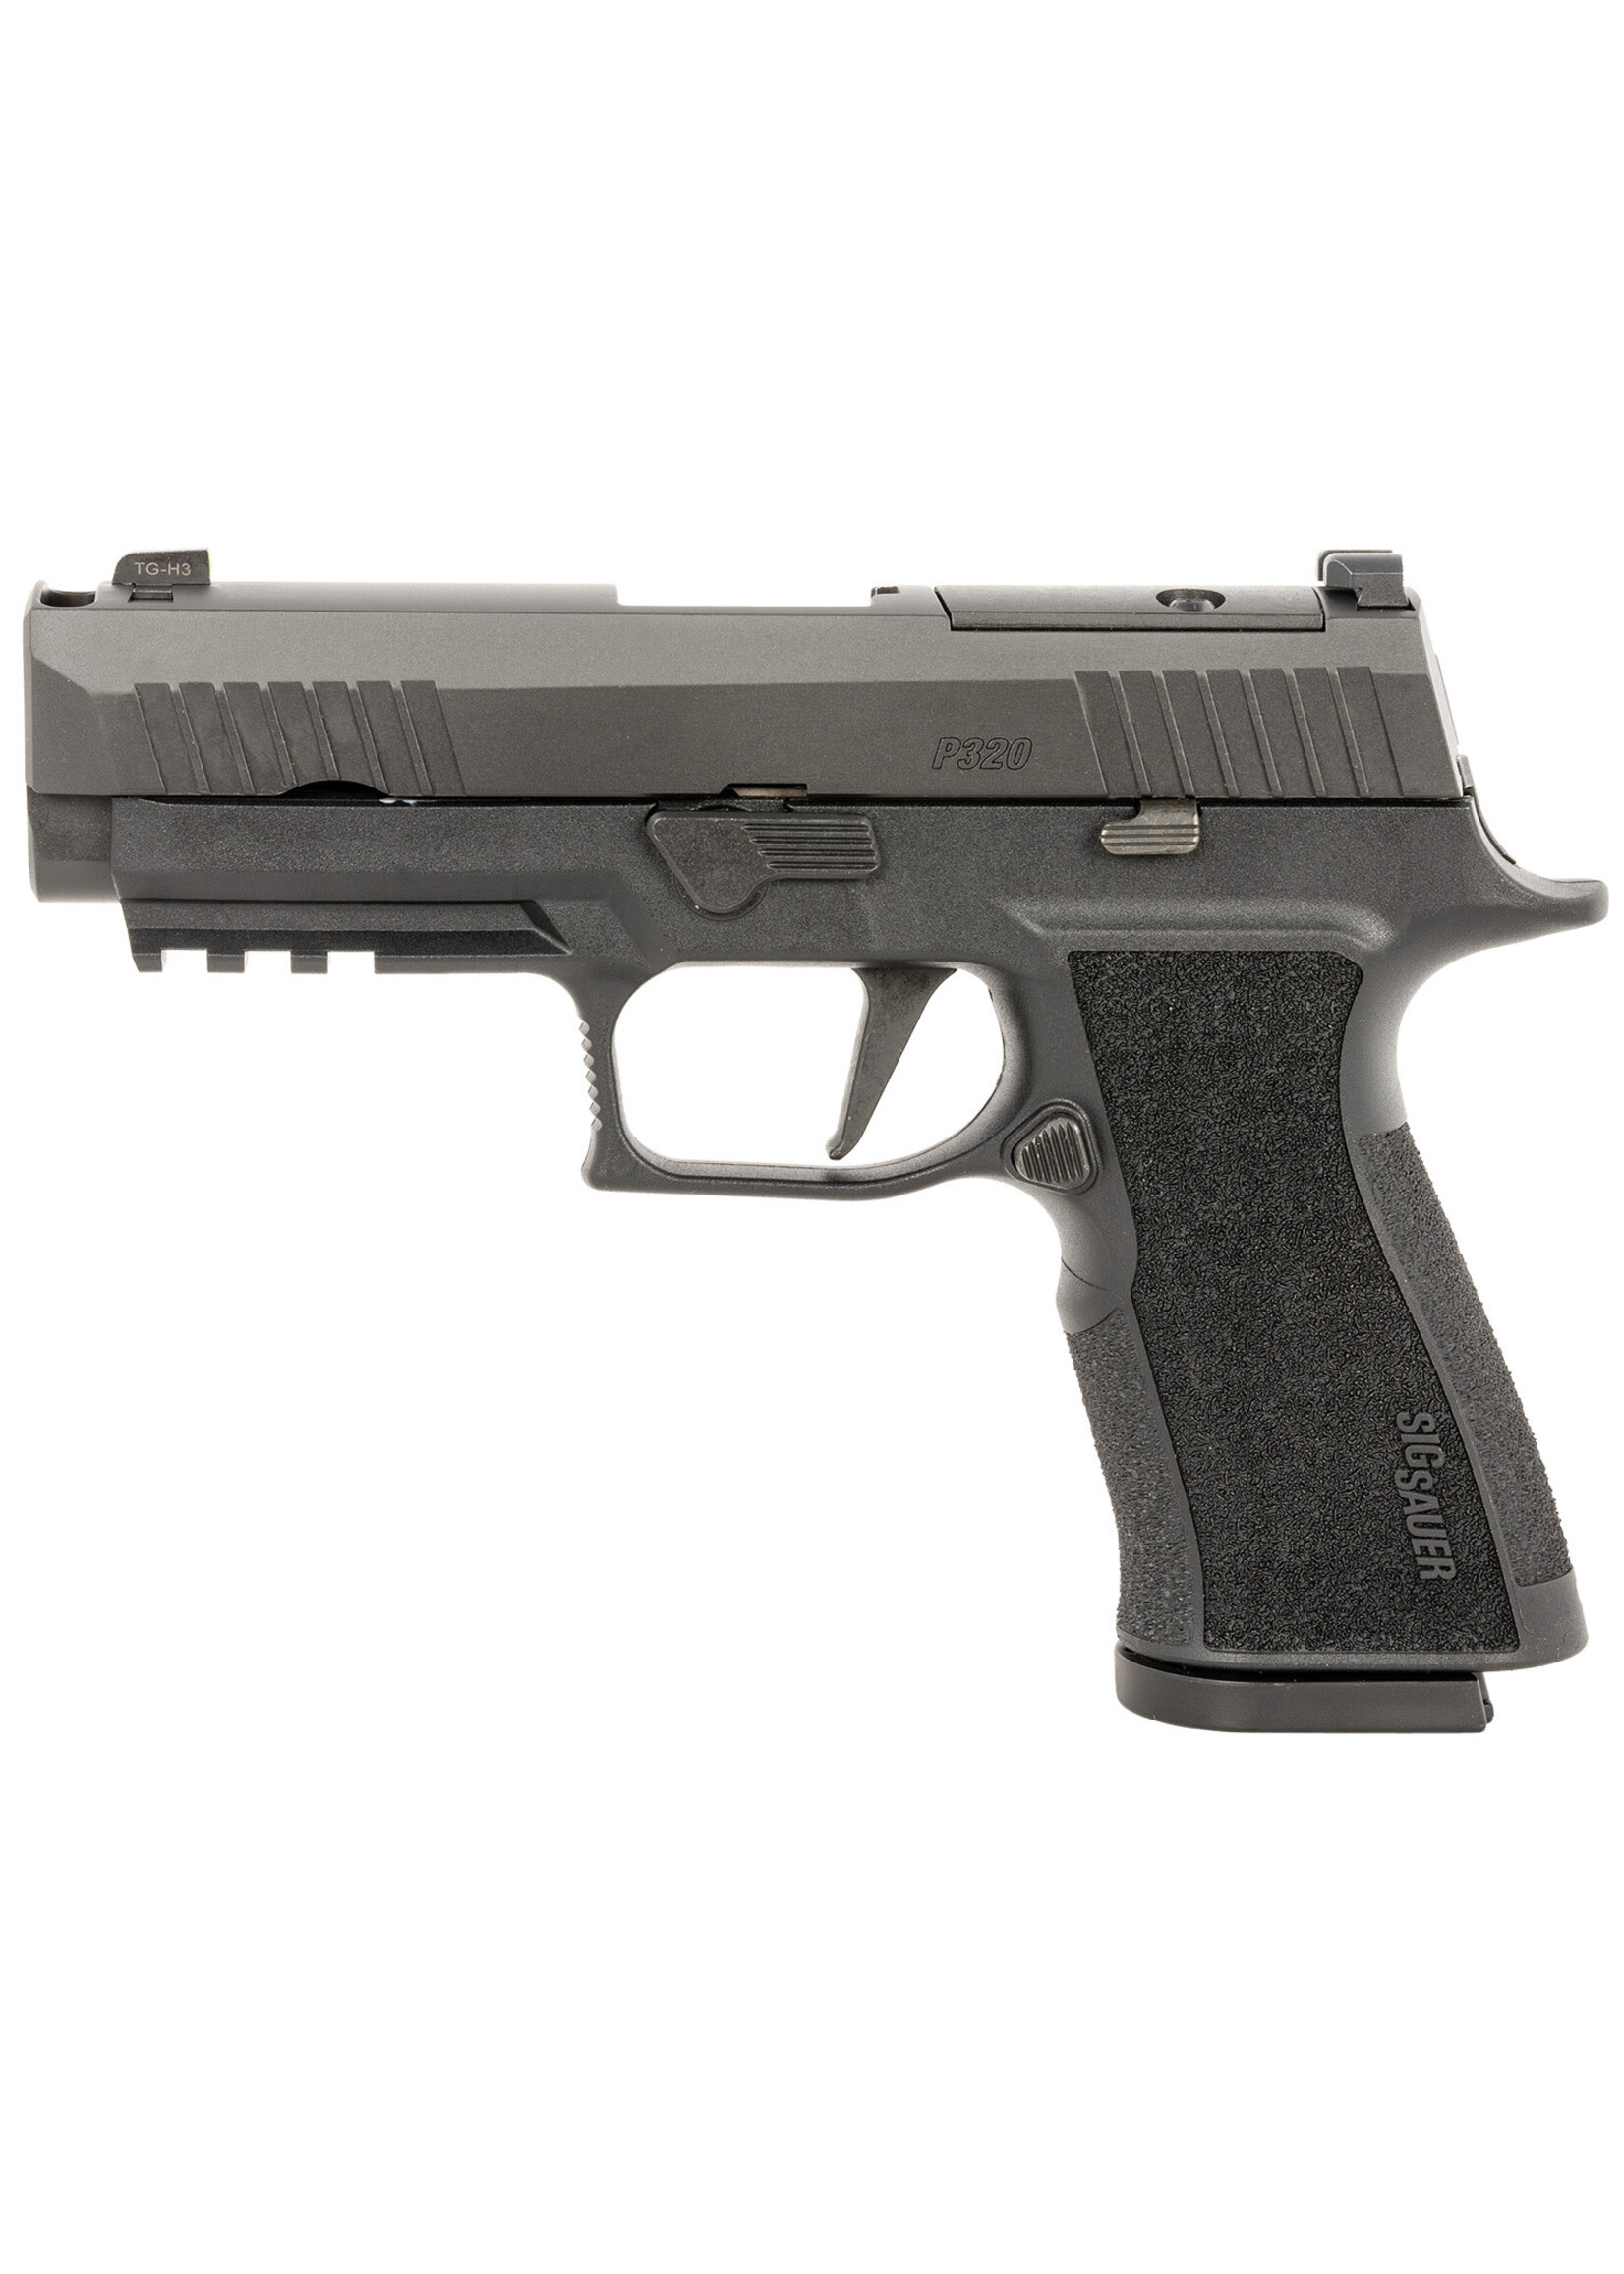 Sig Sauer Sig Sauer 320XCA10COMP P320 XTen COMP Compact Frame 10mm Auto 15+1, 3.80" Black Bull Barrel, Black Nitron Integrated Compensation/Optic Ready/Serrated Stainless Steel Slide, Black Polymer Frame w/Beavertail, Picatinny Rail & XCarry Grip, No Manua